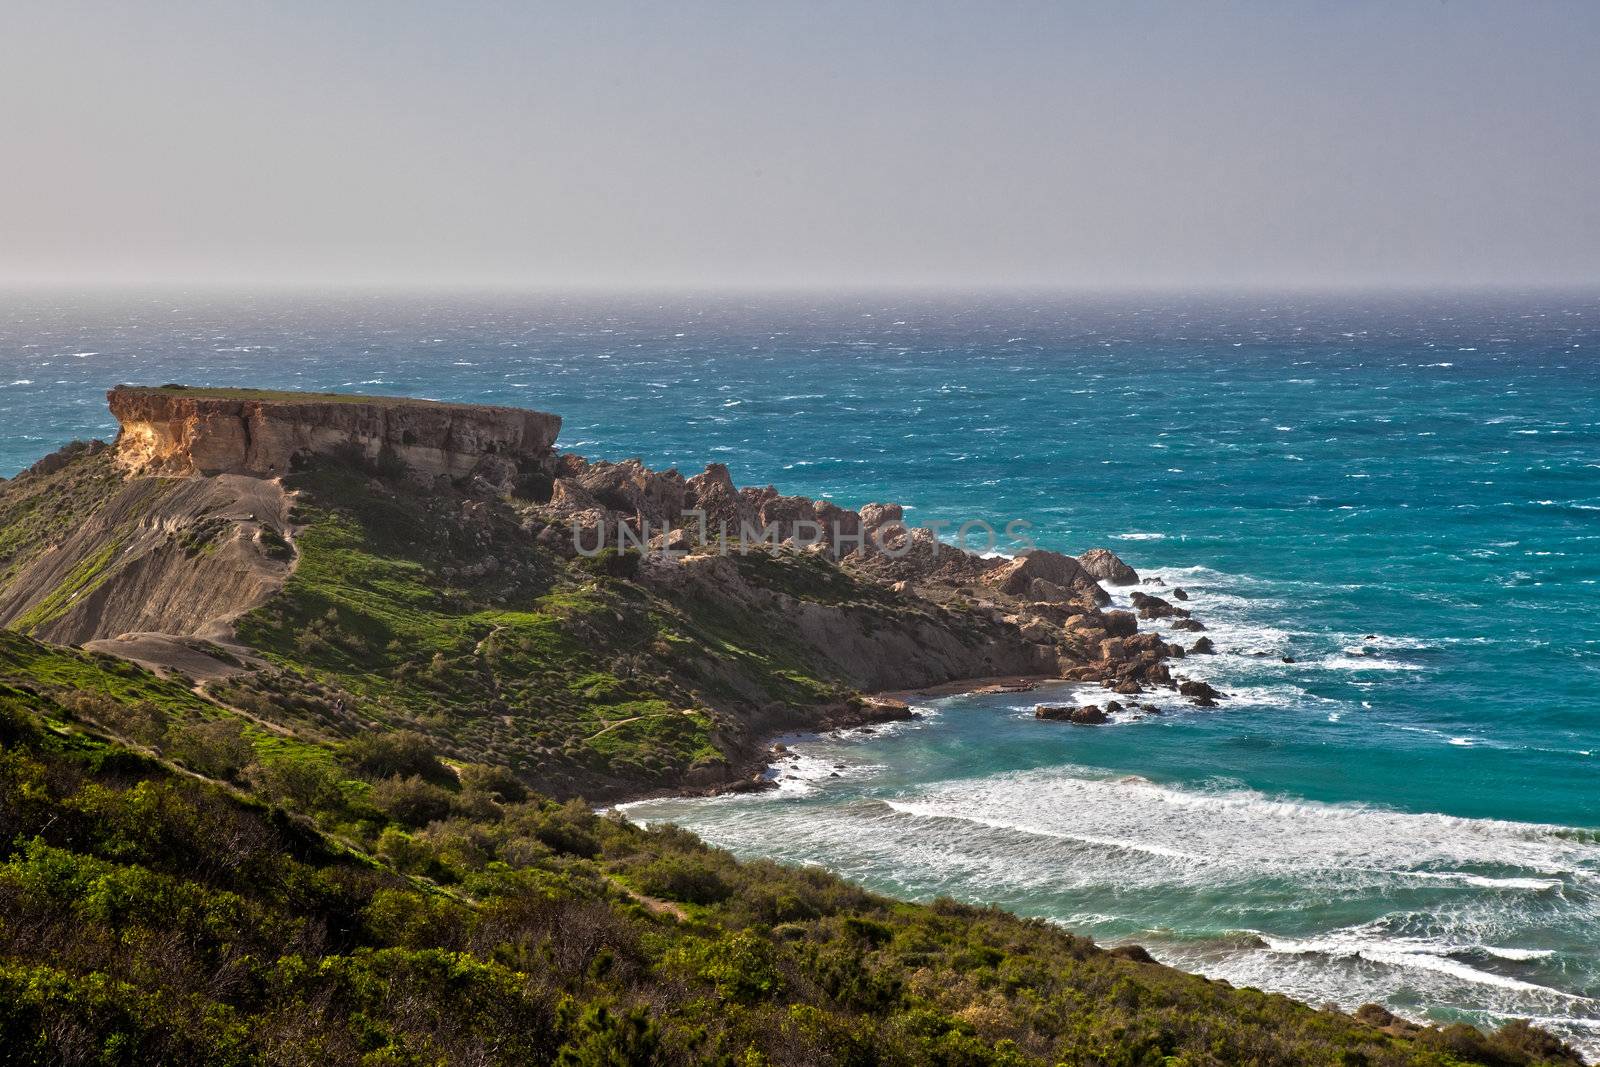 Ghajn Tuffieha Bay is one of the most beautiful and idyllic beaches on the island of Malta,surrounded by unique scenery and within an area of high ecological importance